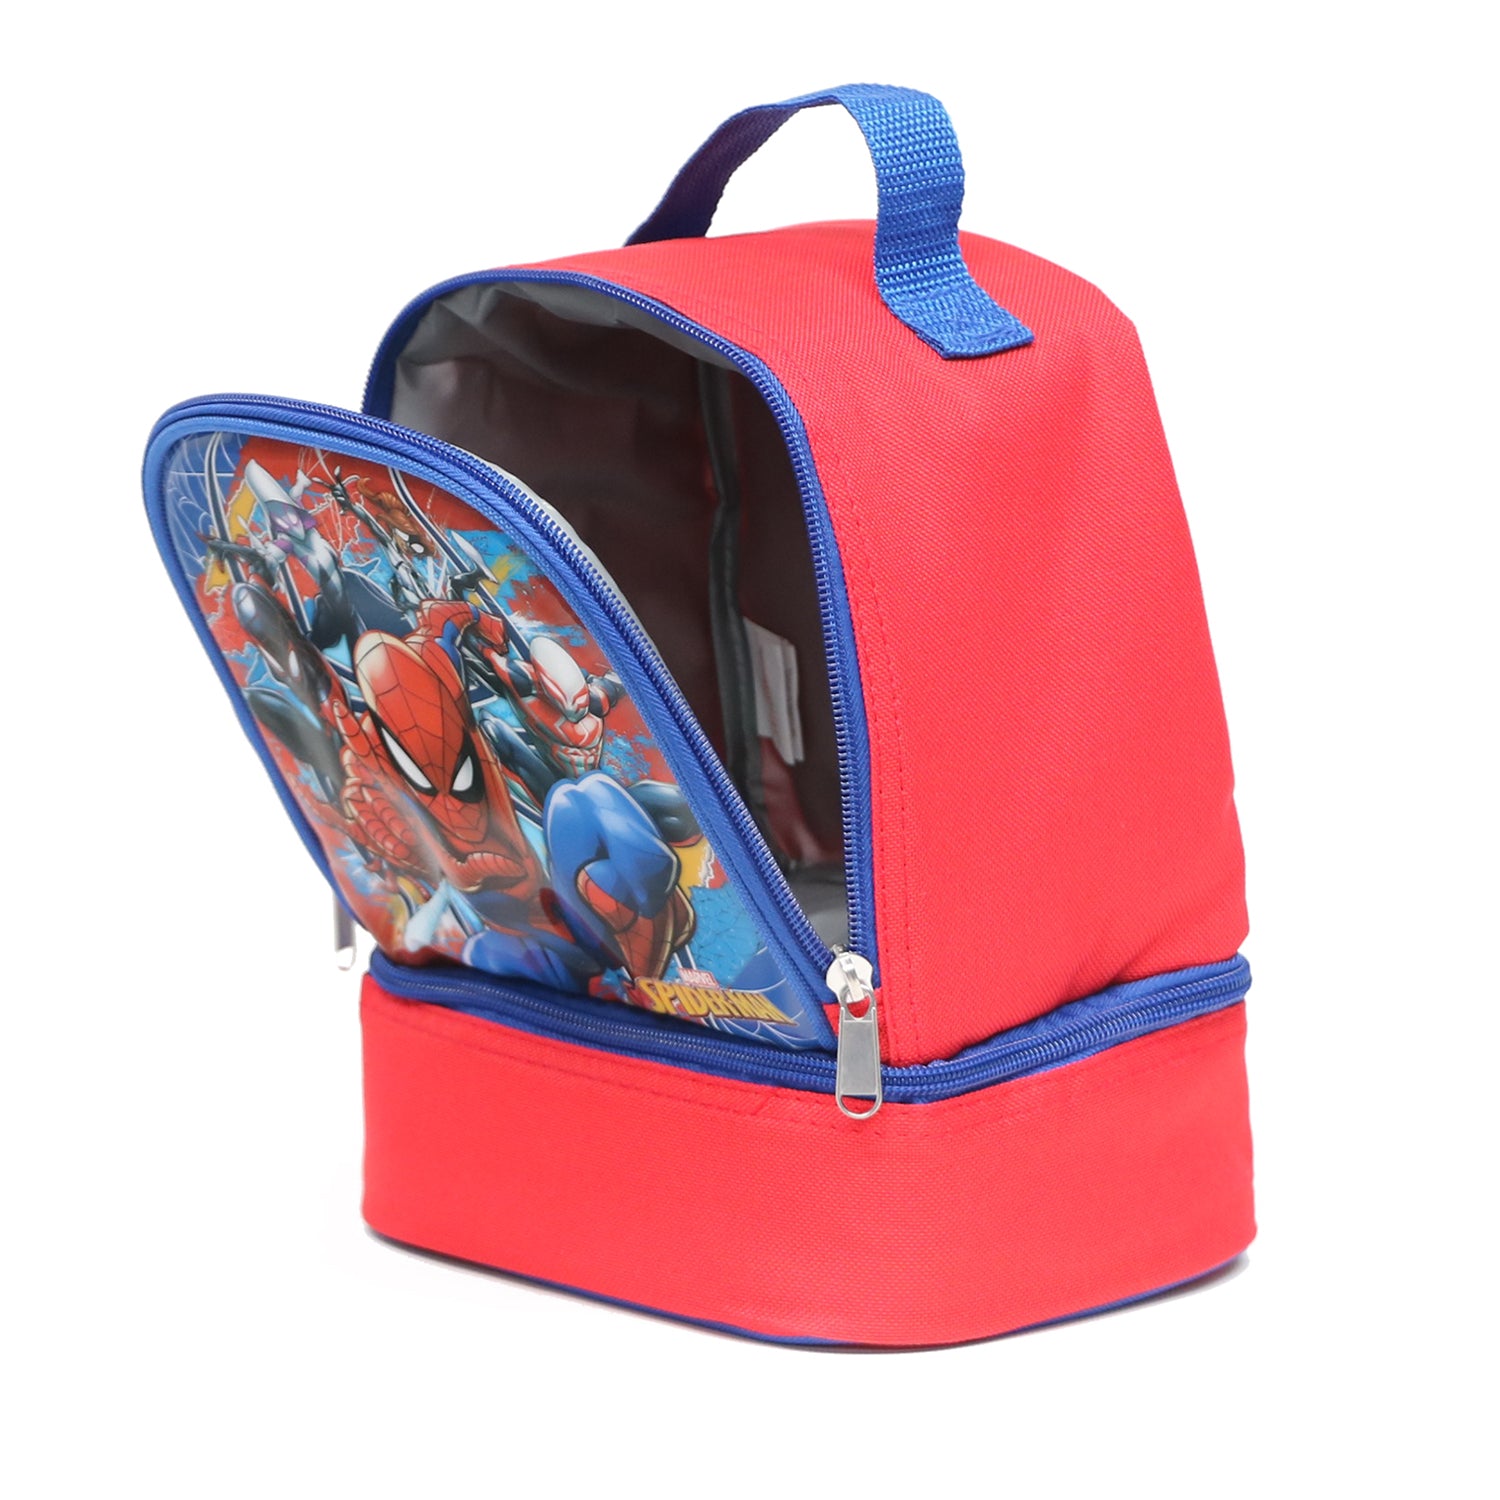 Marvel Kid's Dual Compartment Insulated Reusable Lunch Bag for